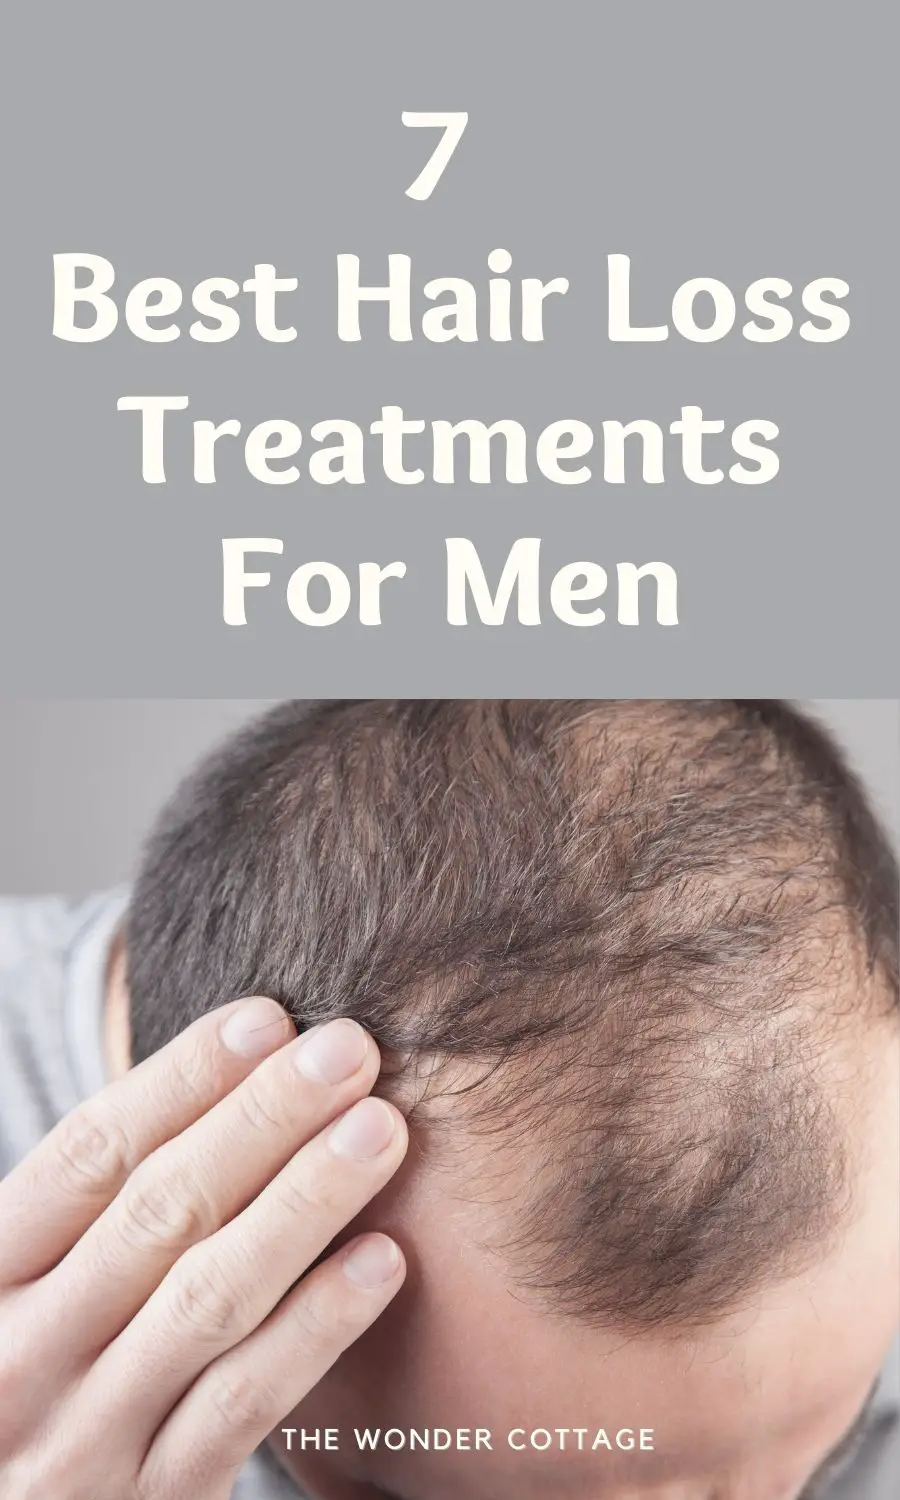 A Complete List Of Best Hair Loss Treatments For Men